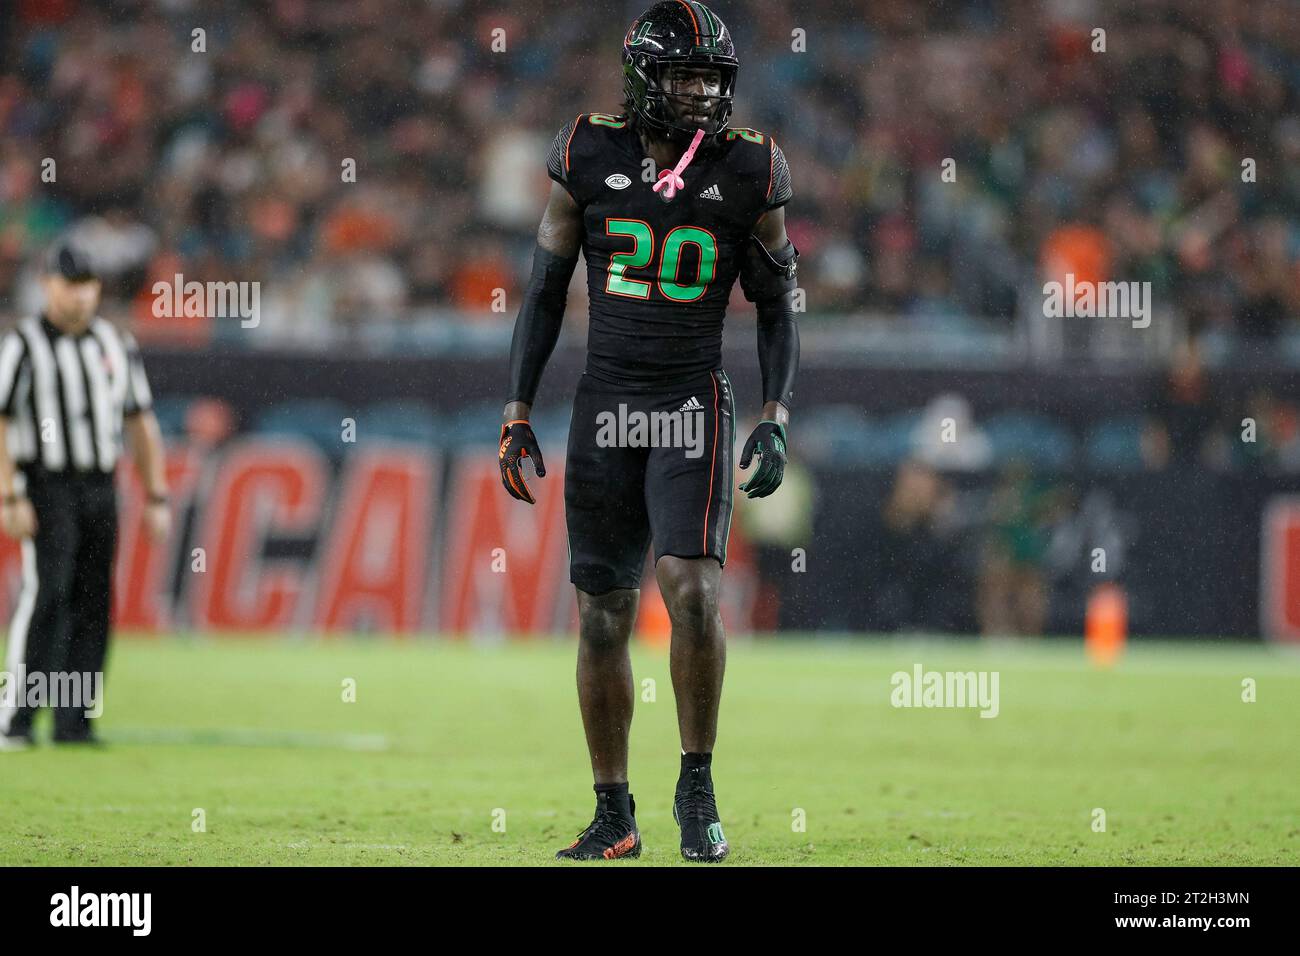 Miami Hurricanes safety James Williams (20) defends during a college football regular season game against the Georgia Tech Yellow Jackets, Saturday, O Stock Photo